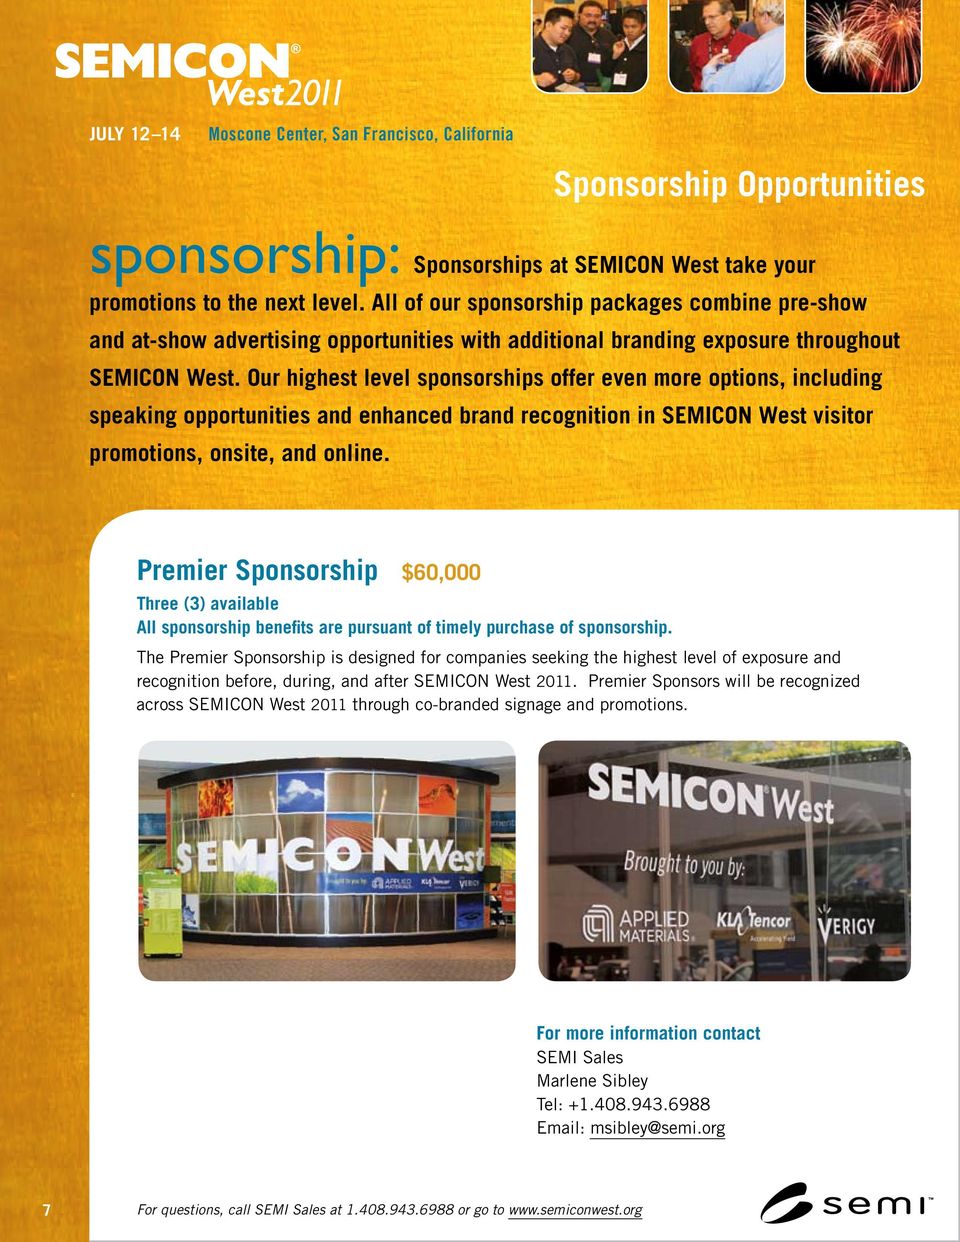 Our highest level sponsorships offer even more options, including speaking opportunities and enhanced brand recognition in SEMICON West visitor promotions, onsite, and online.